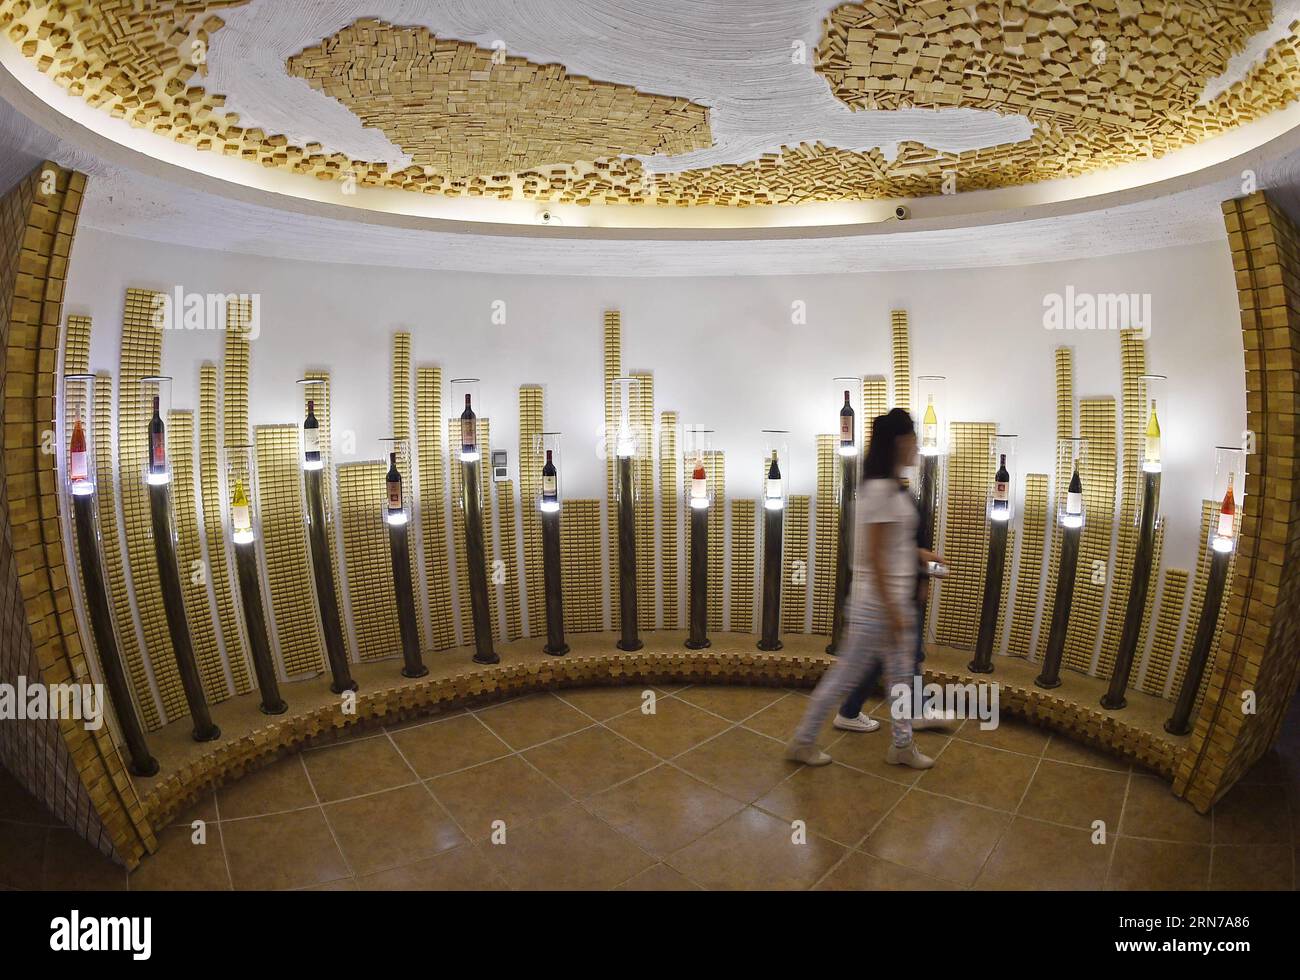 A tourist visits an exhibition hall of a chateau at the eastern foot of Helan Mountain, northwest China s Ningxia Hui Autonomous Region, Aug. 28, 2015. Many chateaus at the eastern foot of Helan Mountain, a golden belt for planting grapes, developed their tourism by attracting tourists with chateau cultures. Ningxia region, which has 590,000 mu (39,333 hectares) of vineyards, has planned to build 10 vineyard towns and more than 100 large-scale chateaus by 2020. ) (lfj) CHINA-NINGXIA-CHATEAU TOURISM (CN) WangxPeng PUBLICATIONxNOTxINxCHN   a Tourist visits to Exhibition Hall of a Chateau AT The Stock Photo